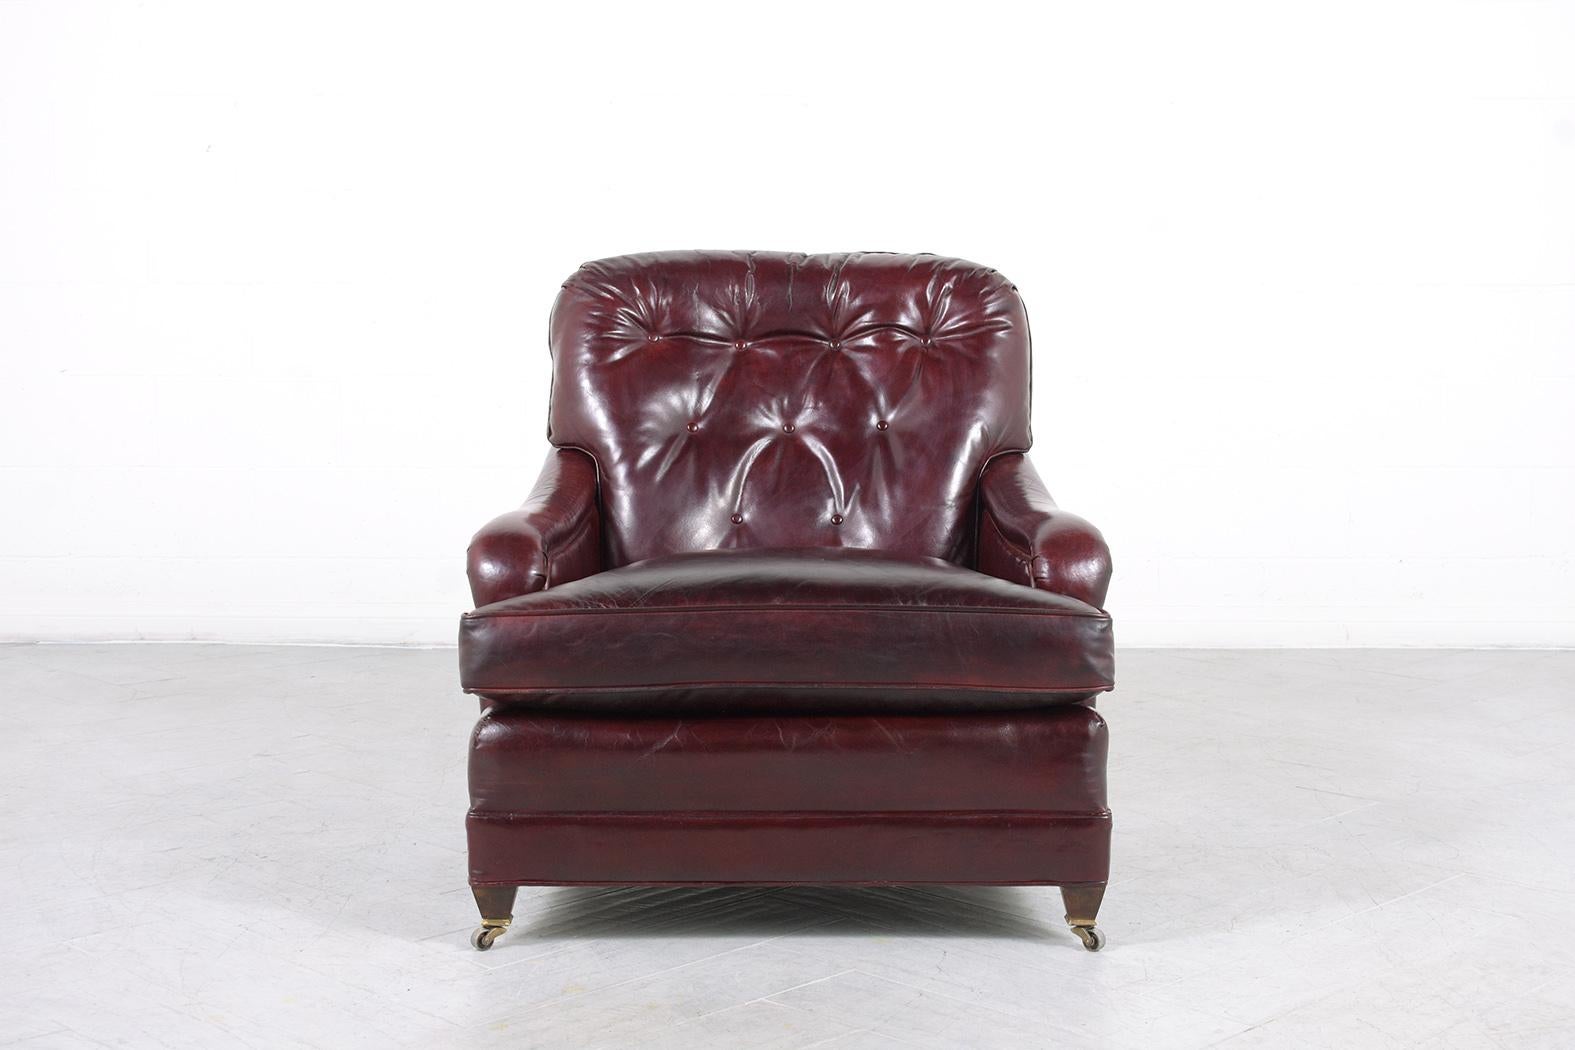 Stained Early 1900s Antique English Chesterfield Chair in Deep Cordova Leather